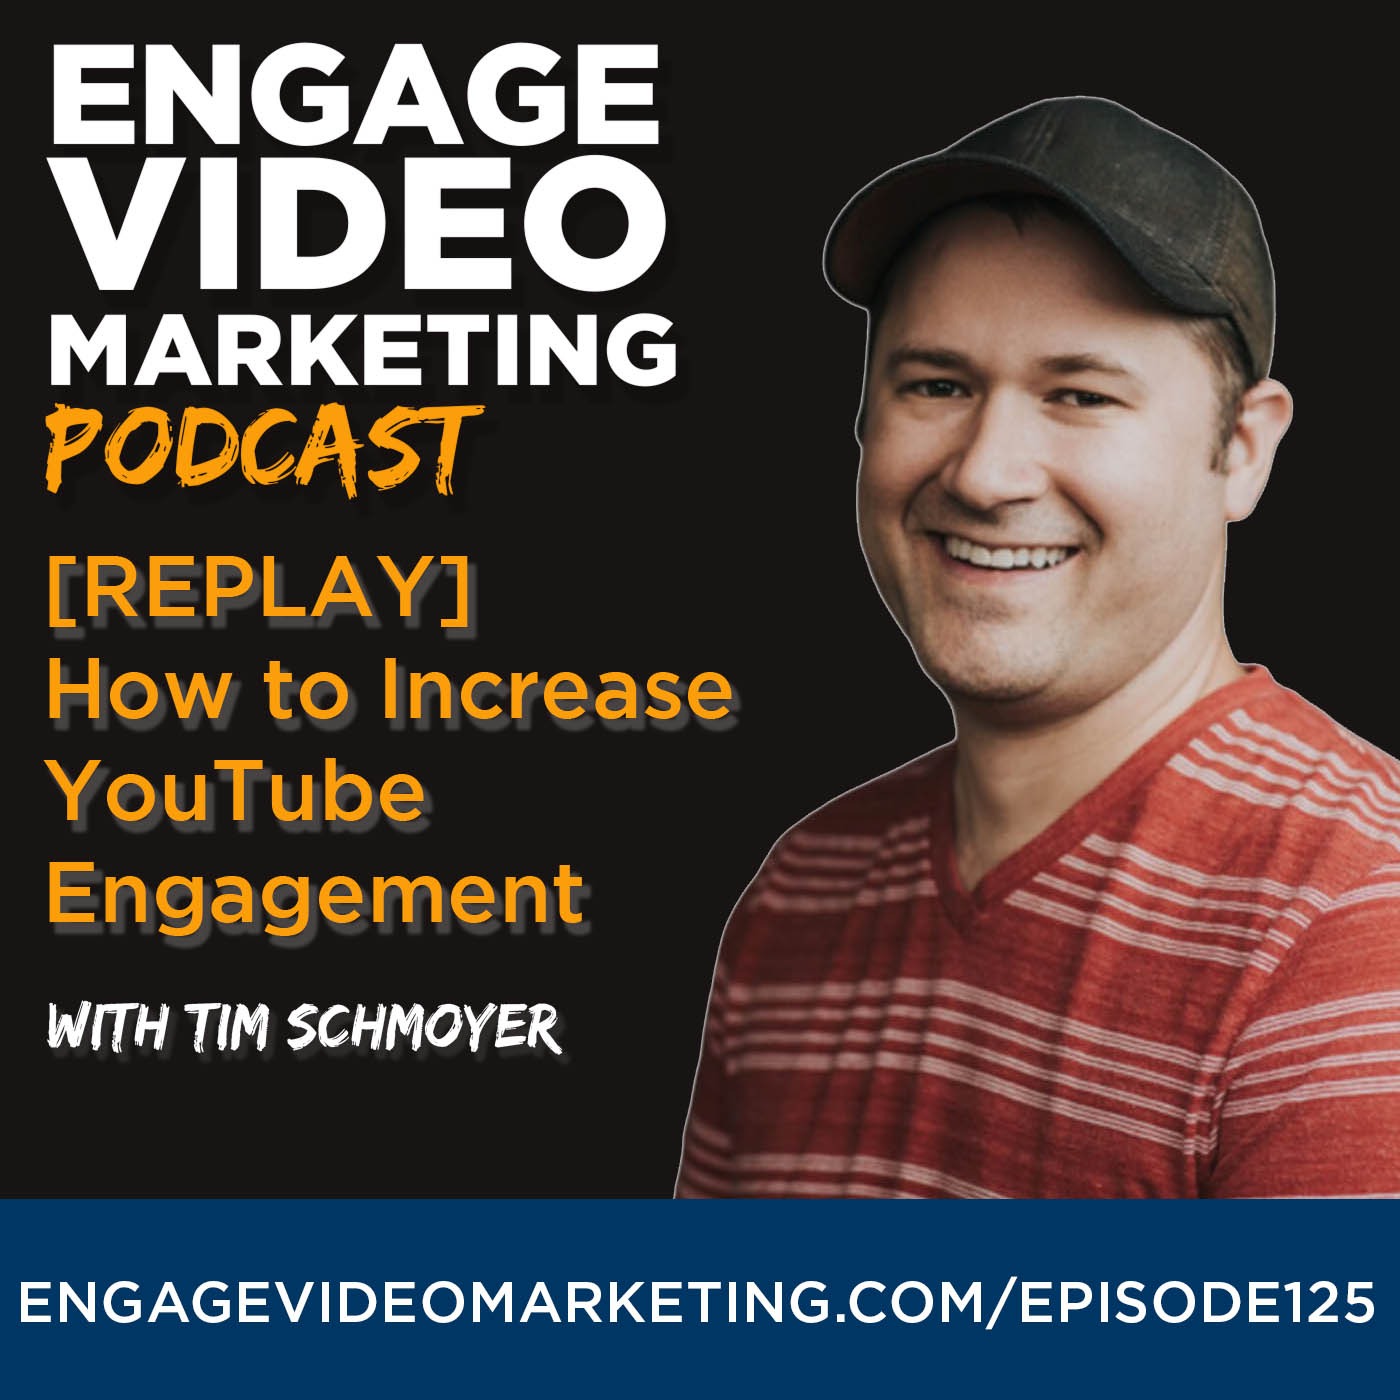 [REPLAY] How to Increase YouTube Engagement with Tim Schmoyer